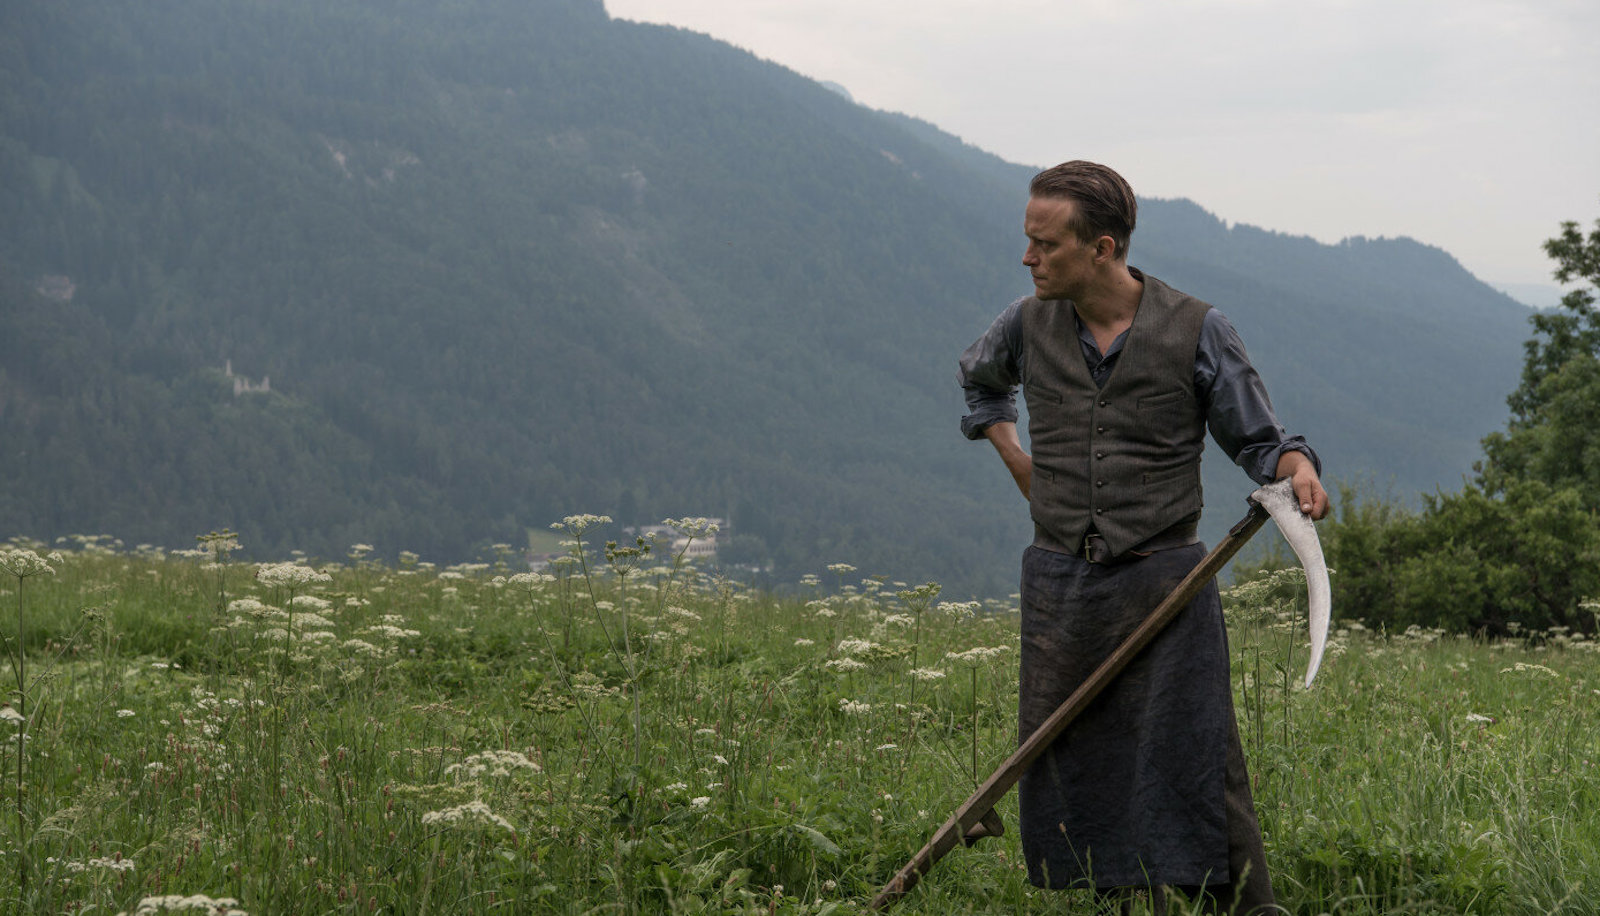 A man holds a scythe in a field of grass amidst mountains